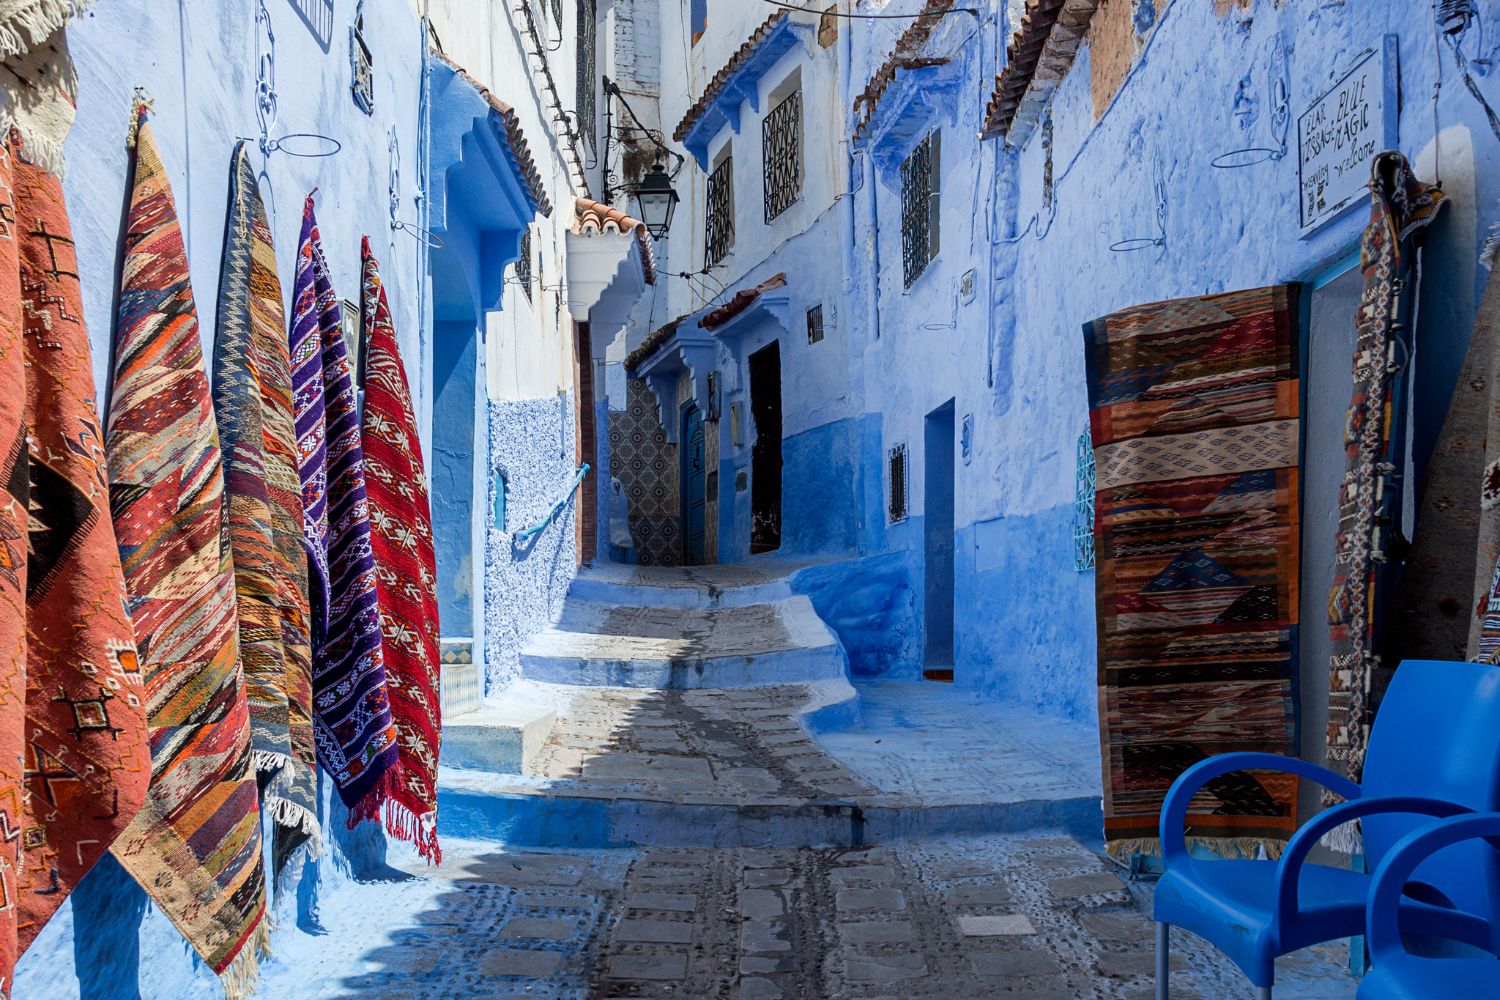 A maze of blue and white buildings with beautiful doors in the Medina of Tangier, Morocco